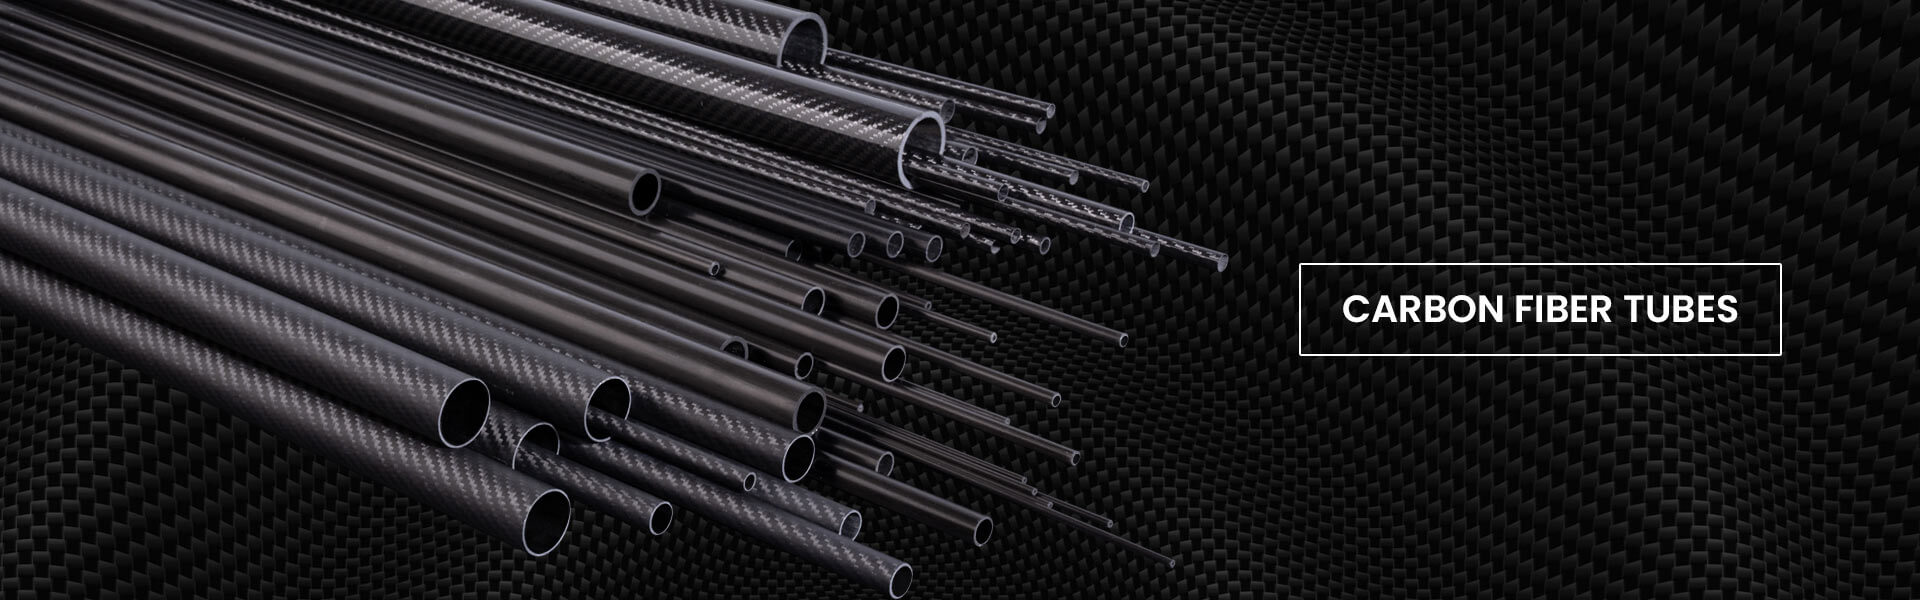 Carbon Fiber Rods and Tubes